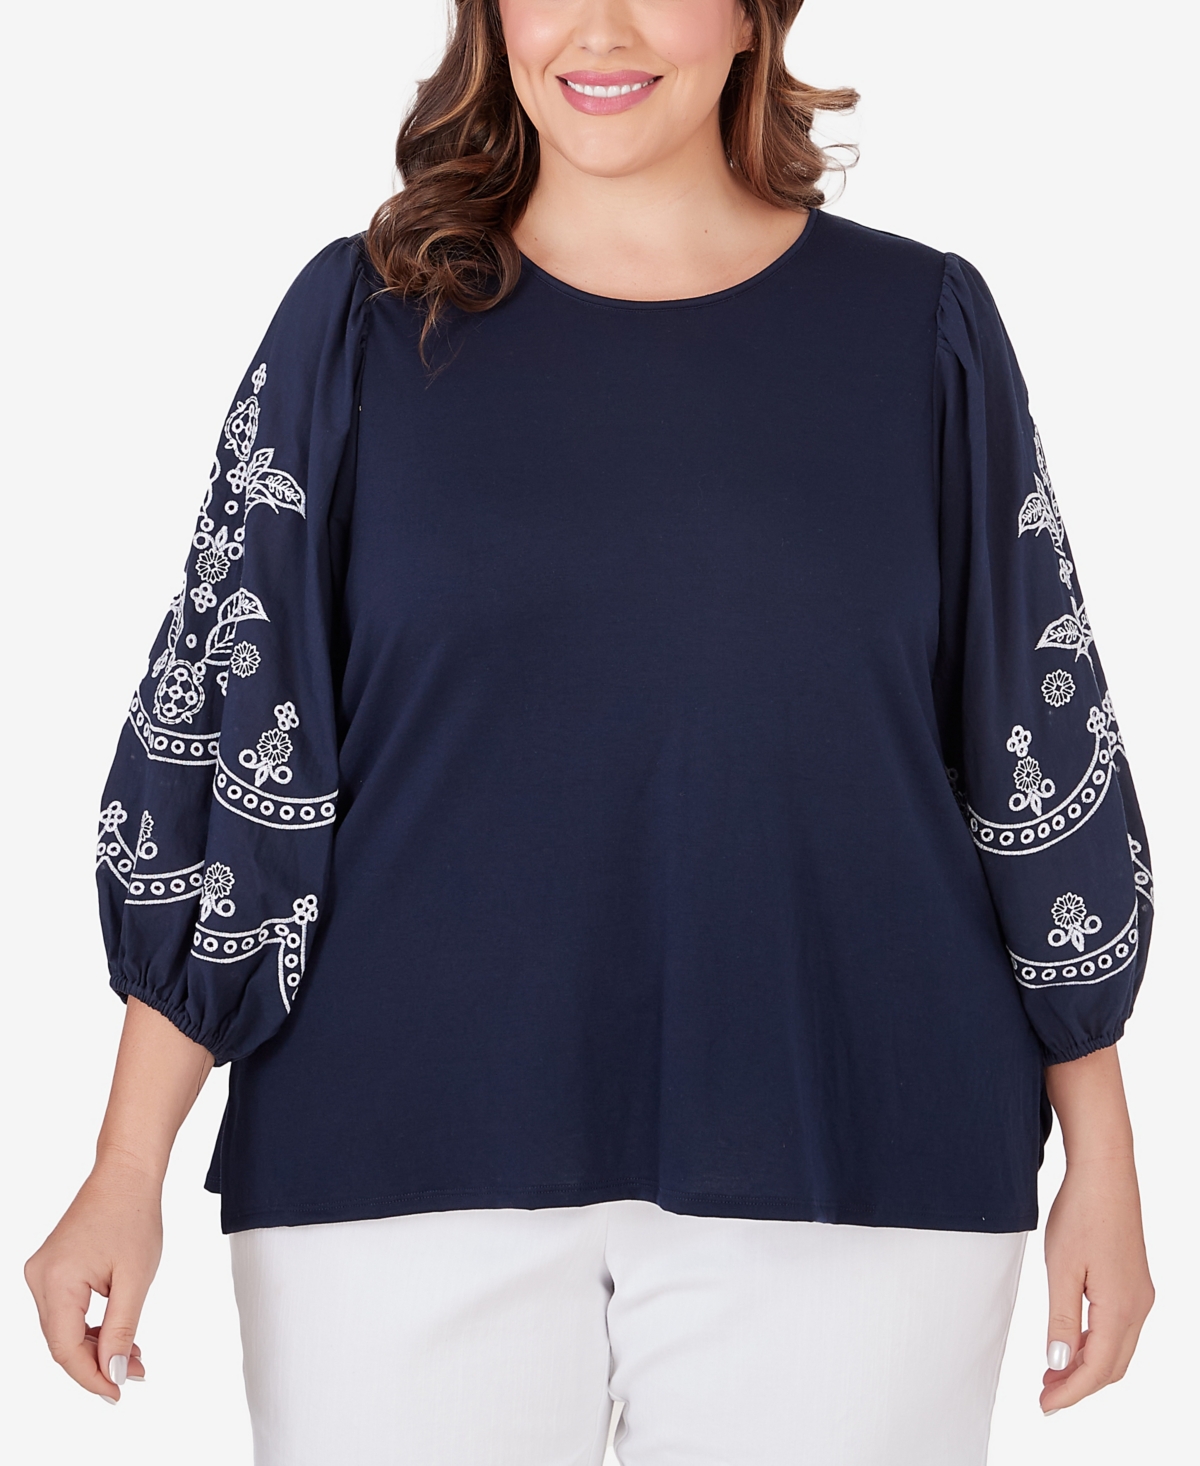 Ruby Rd. Plus Size Medallion Embroidered Lantern Sleeve Top In Navy